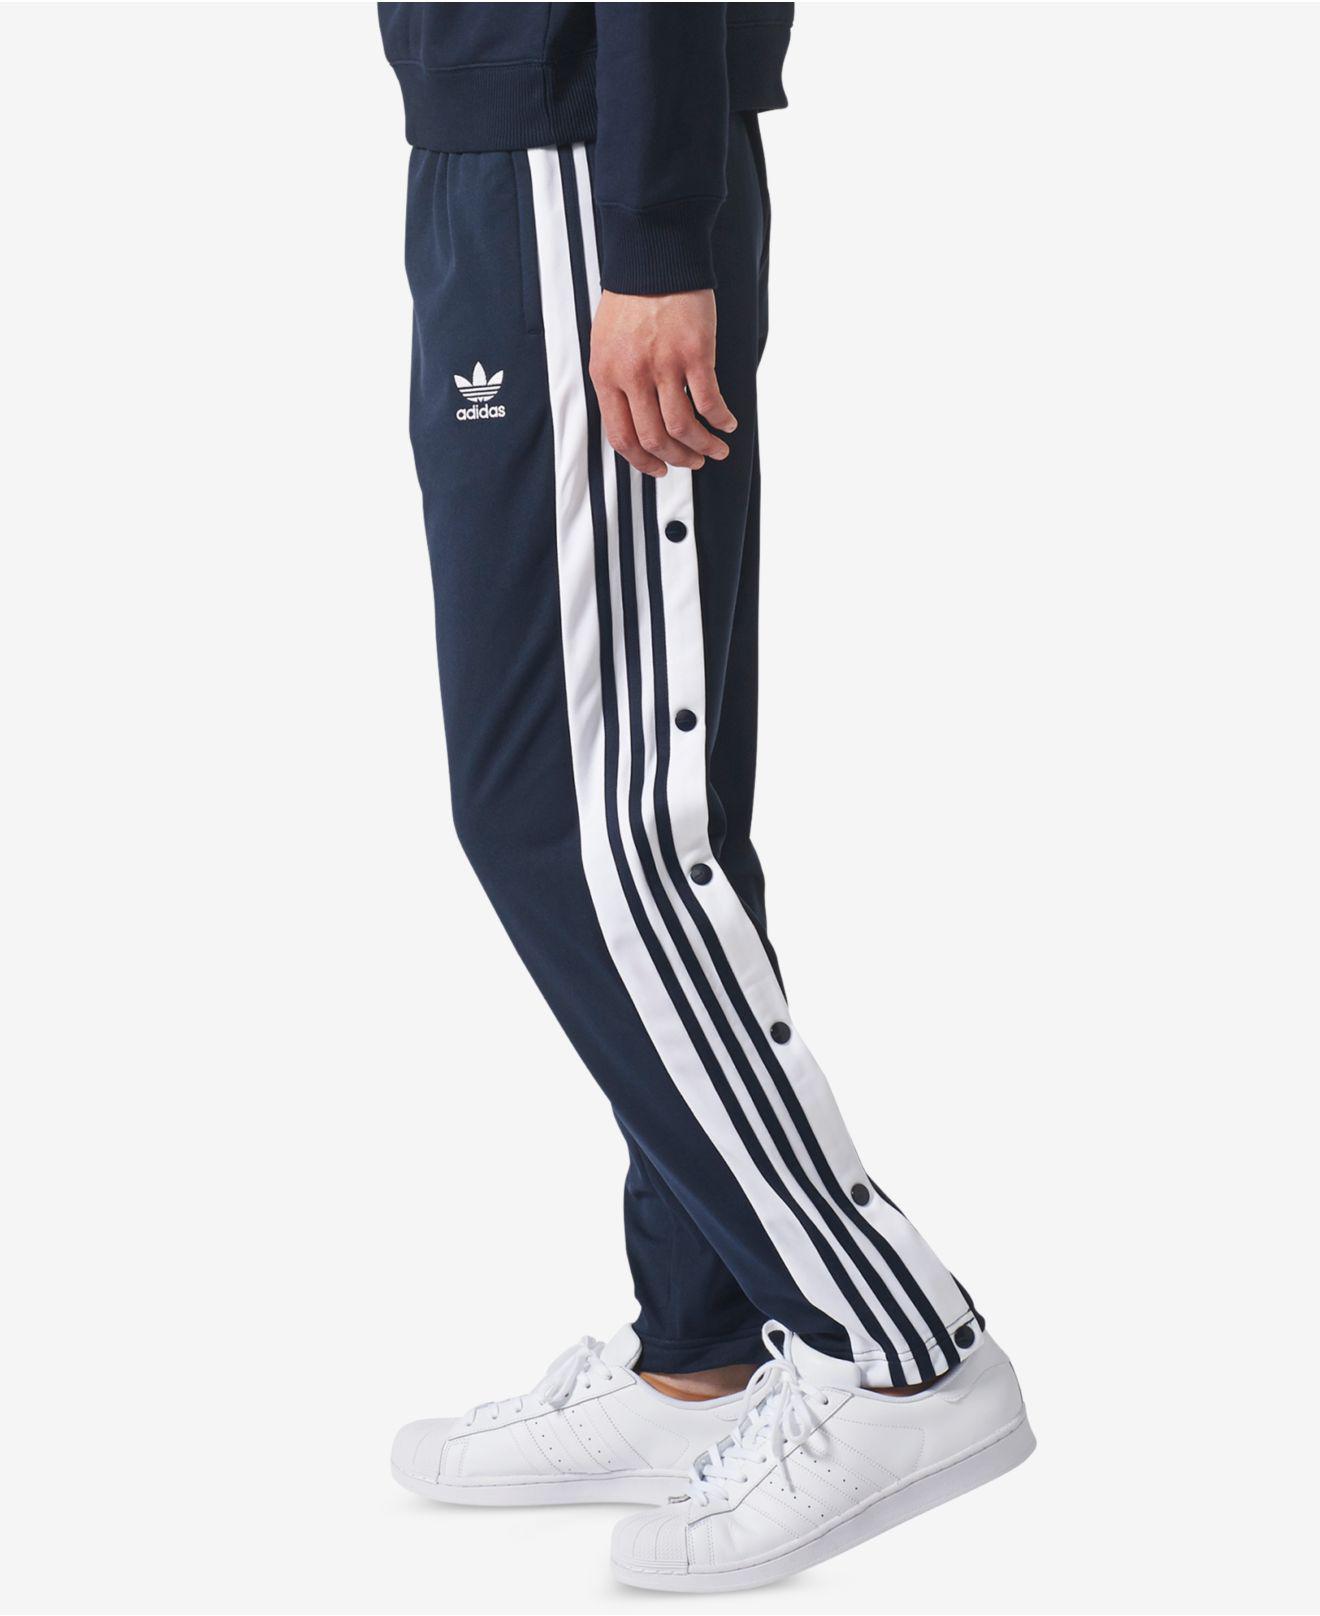 adidas side button pants mens